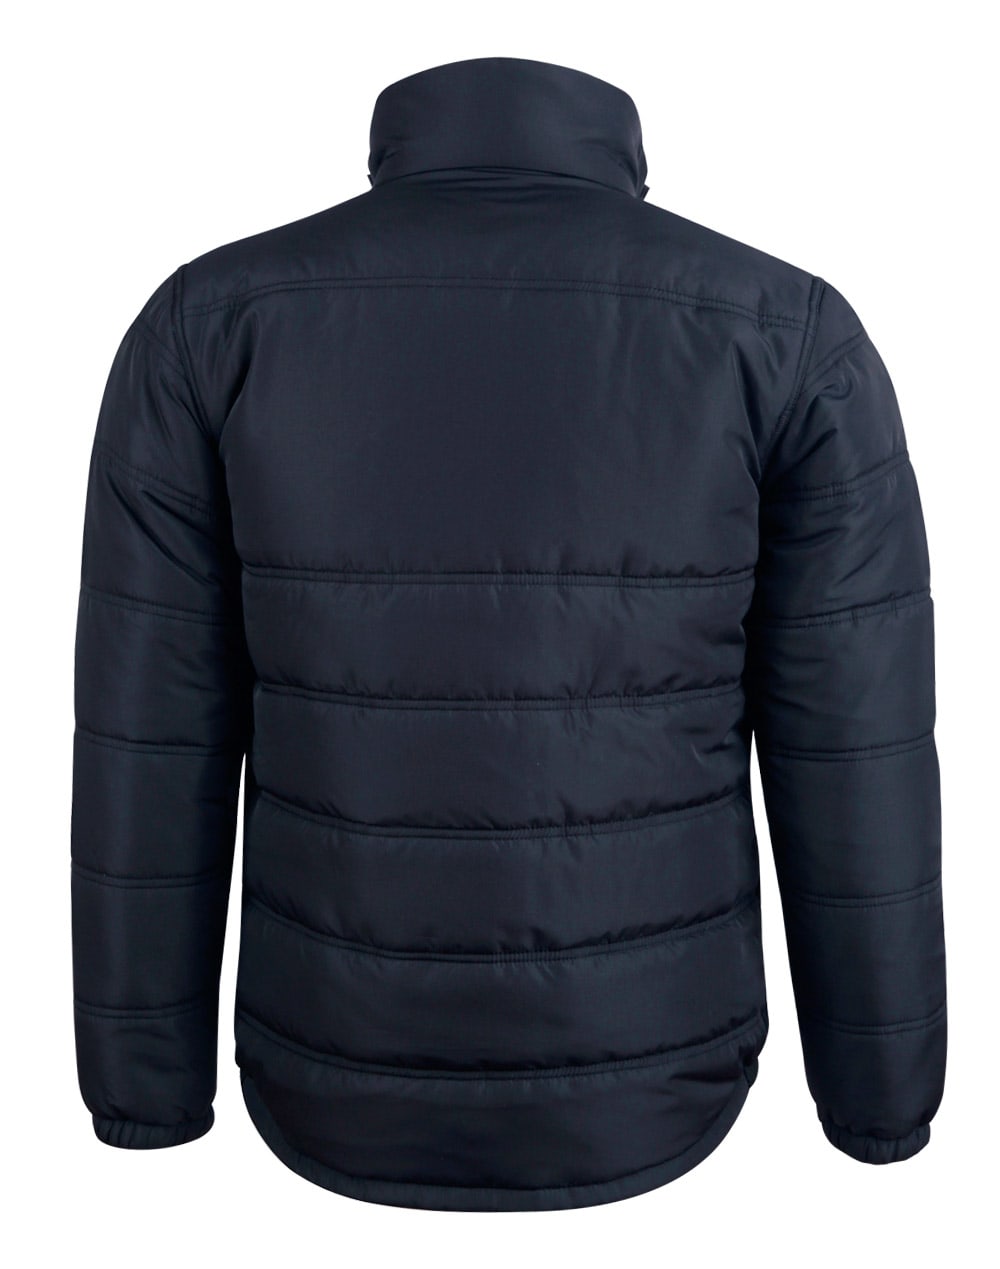 Adults Heavy Quilted Jacket100% Polyester JK48 | 